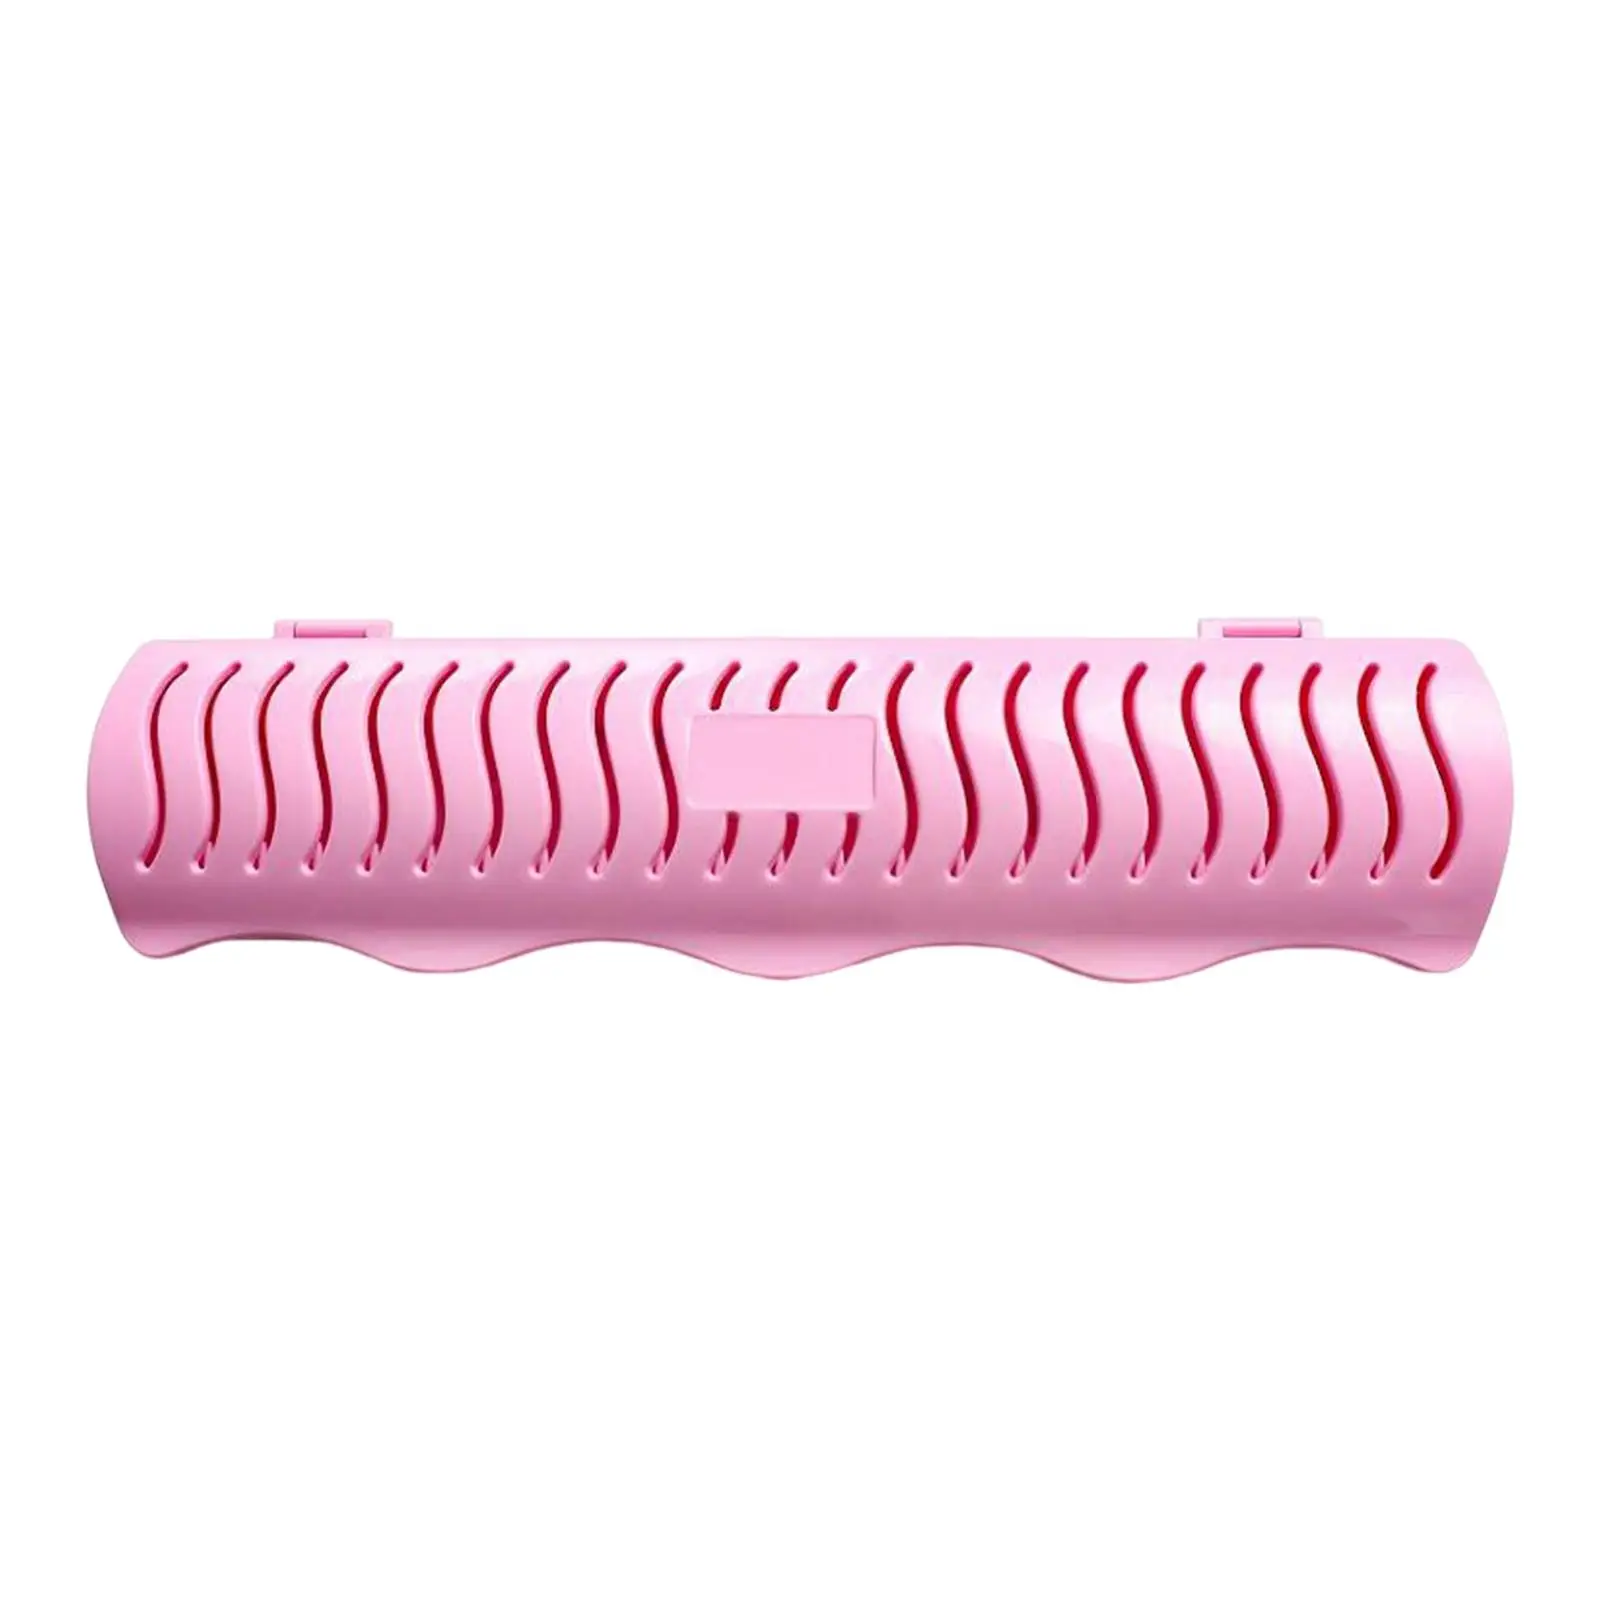 Hair Extension Holder Hanger Hair Extension Caddy for Hair Styling Coloring Washing